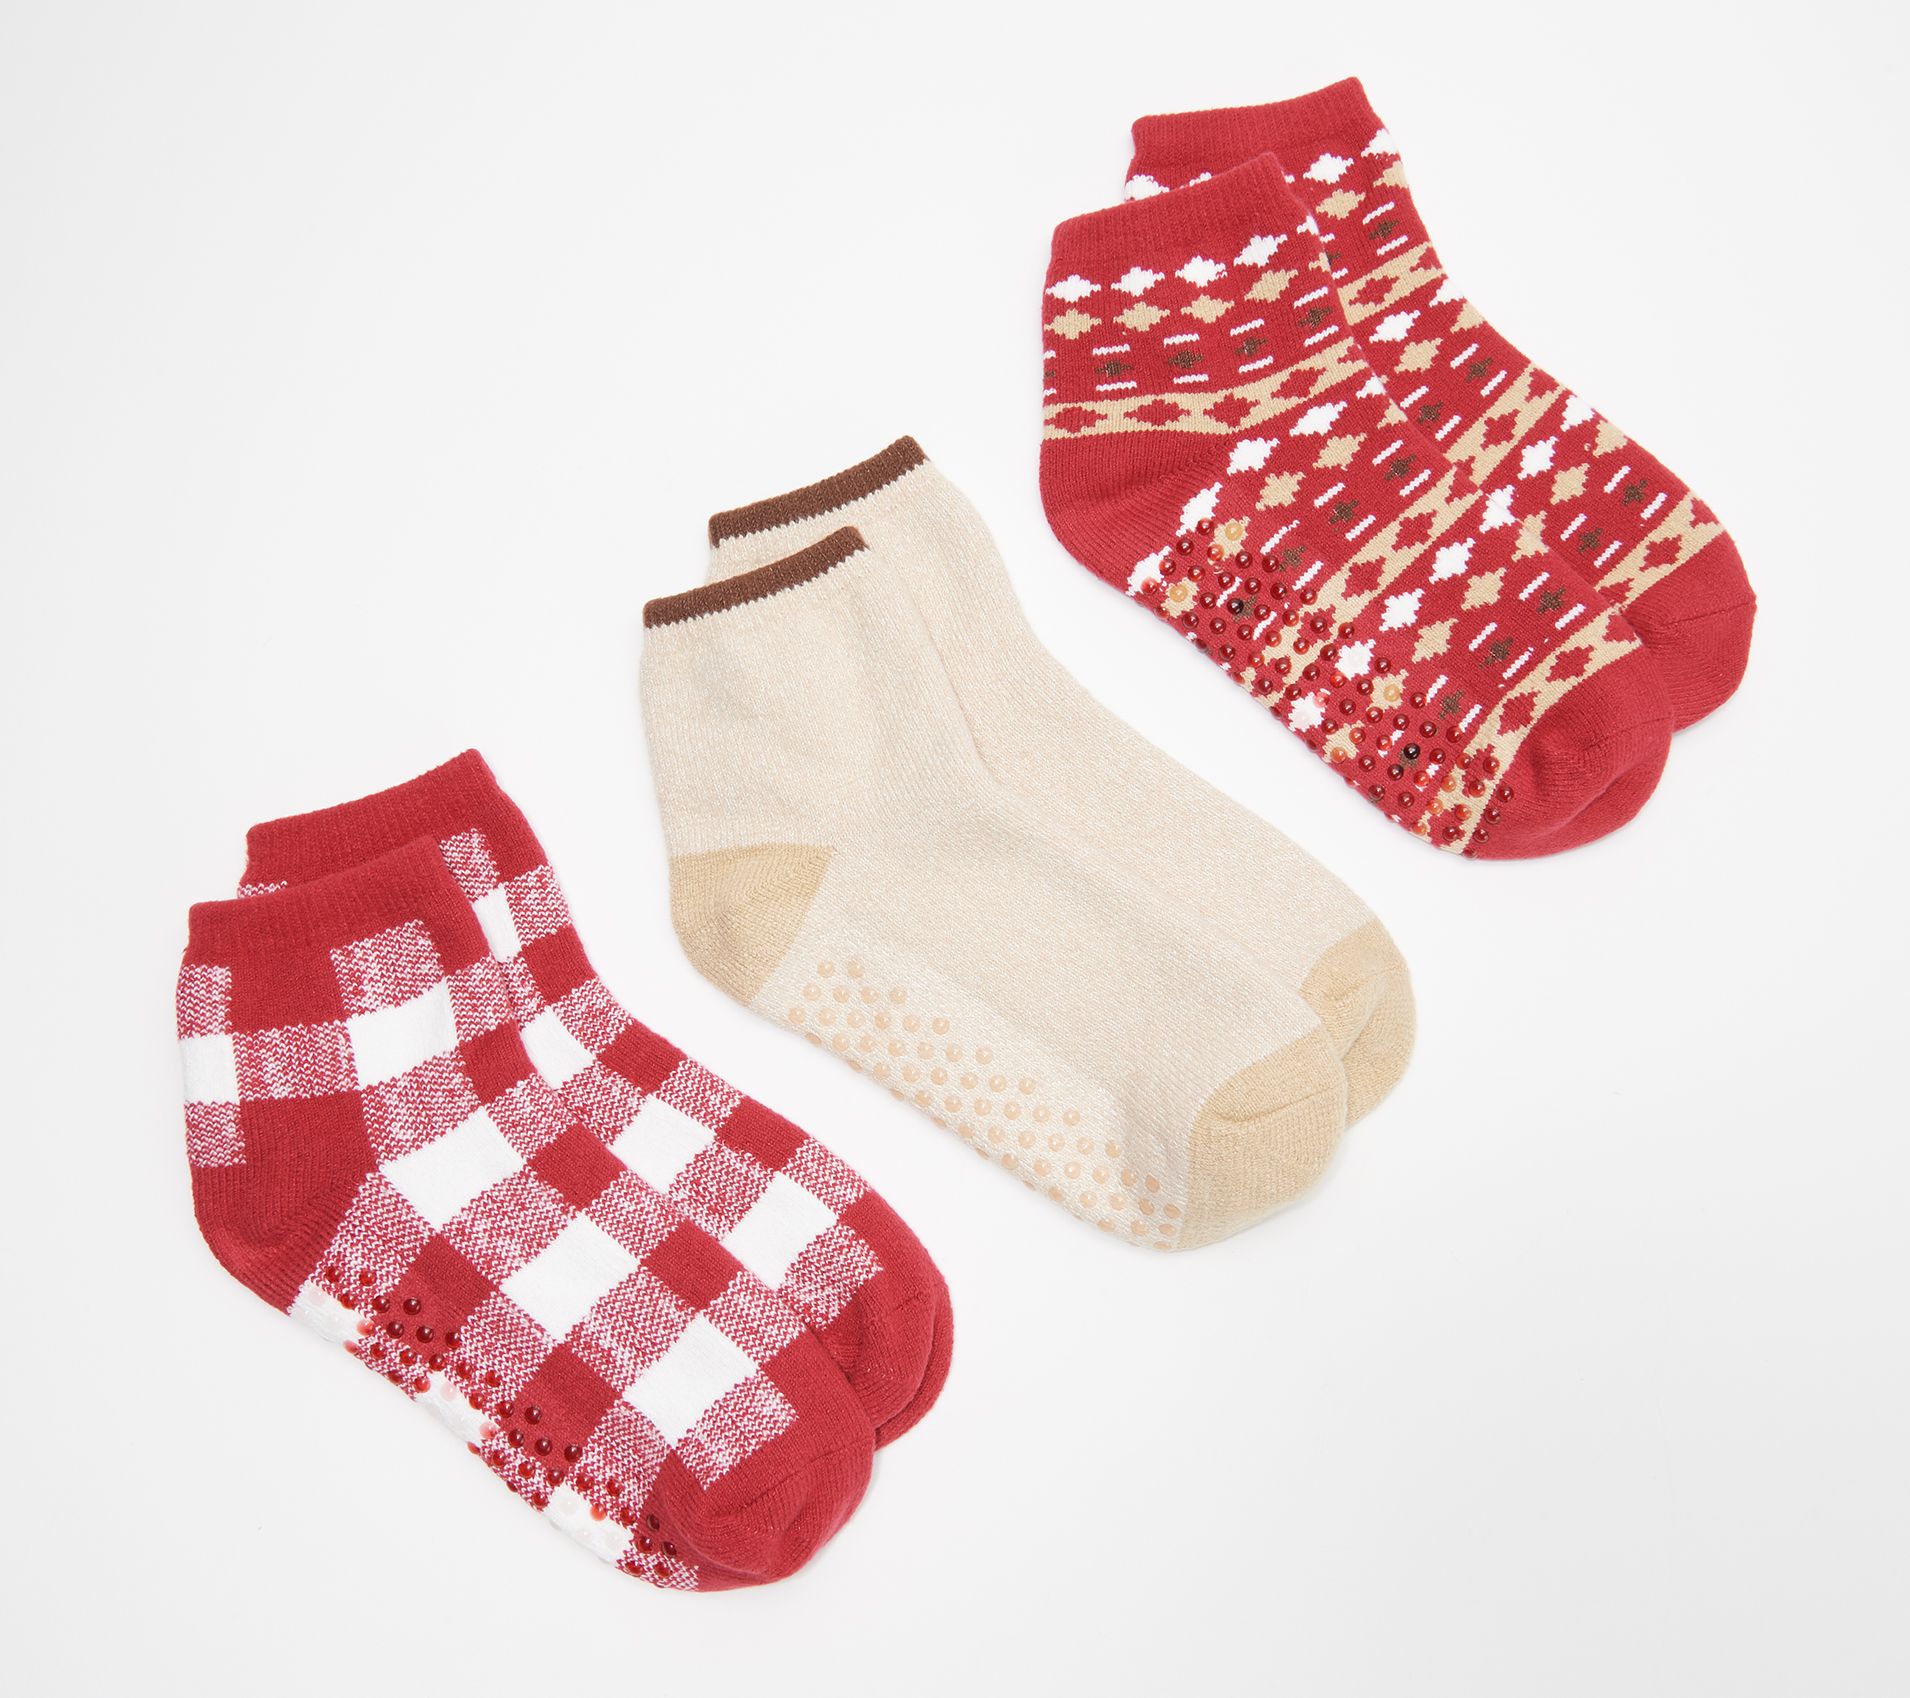 Cuddl Duds Soft Terry Anklet Lounge Socks Set of Three - QVC.com